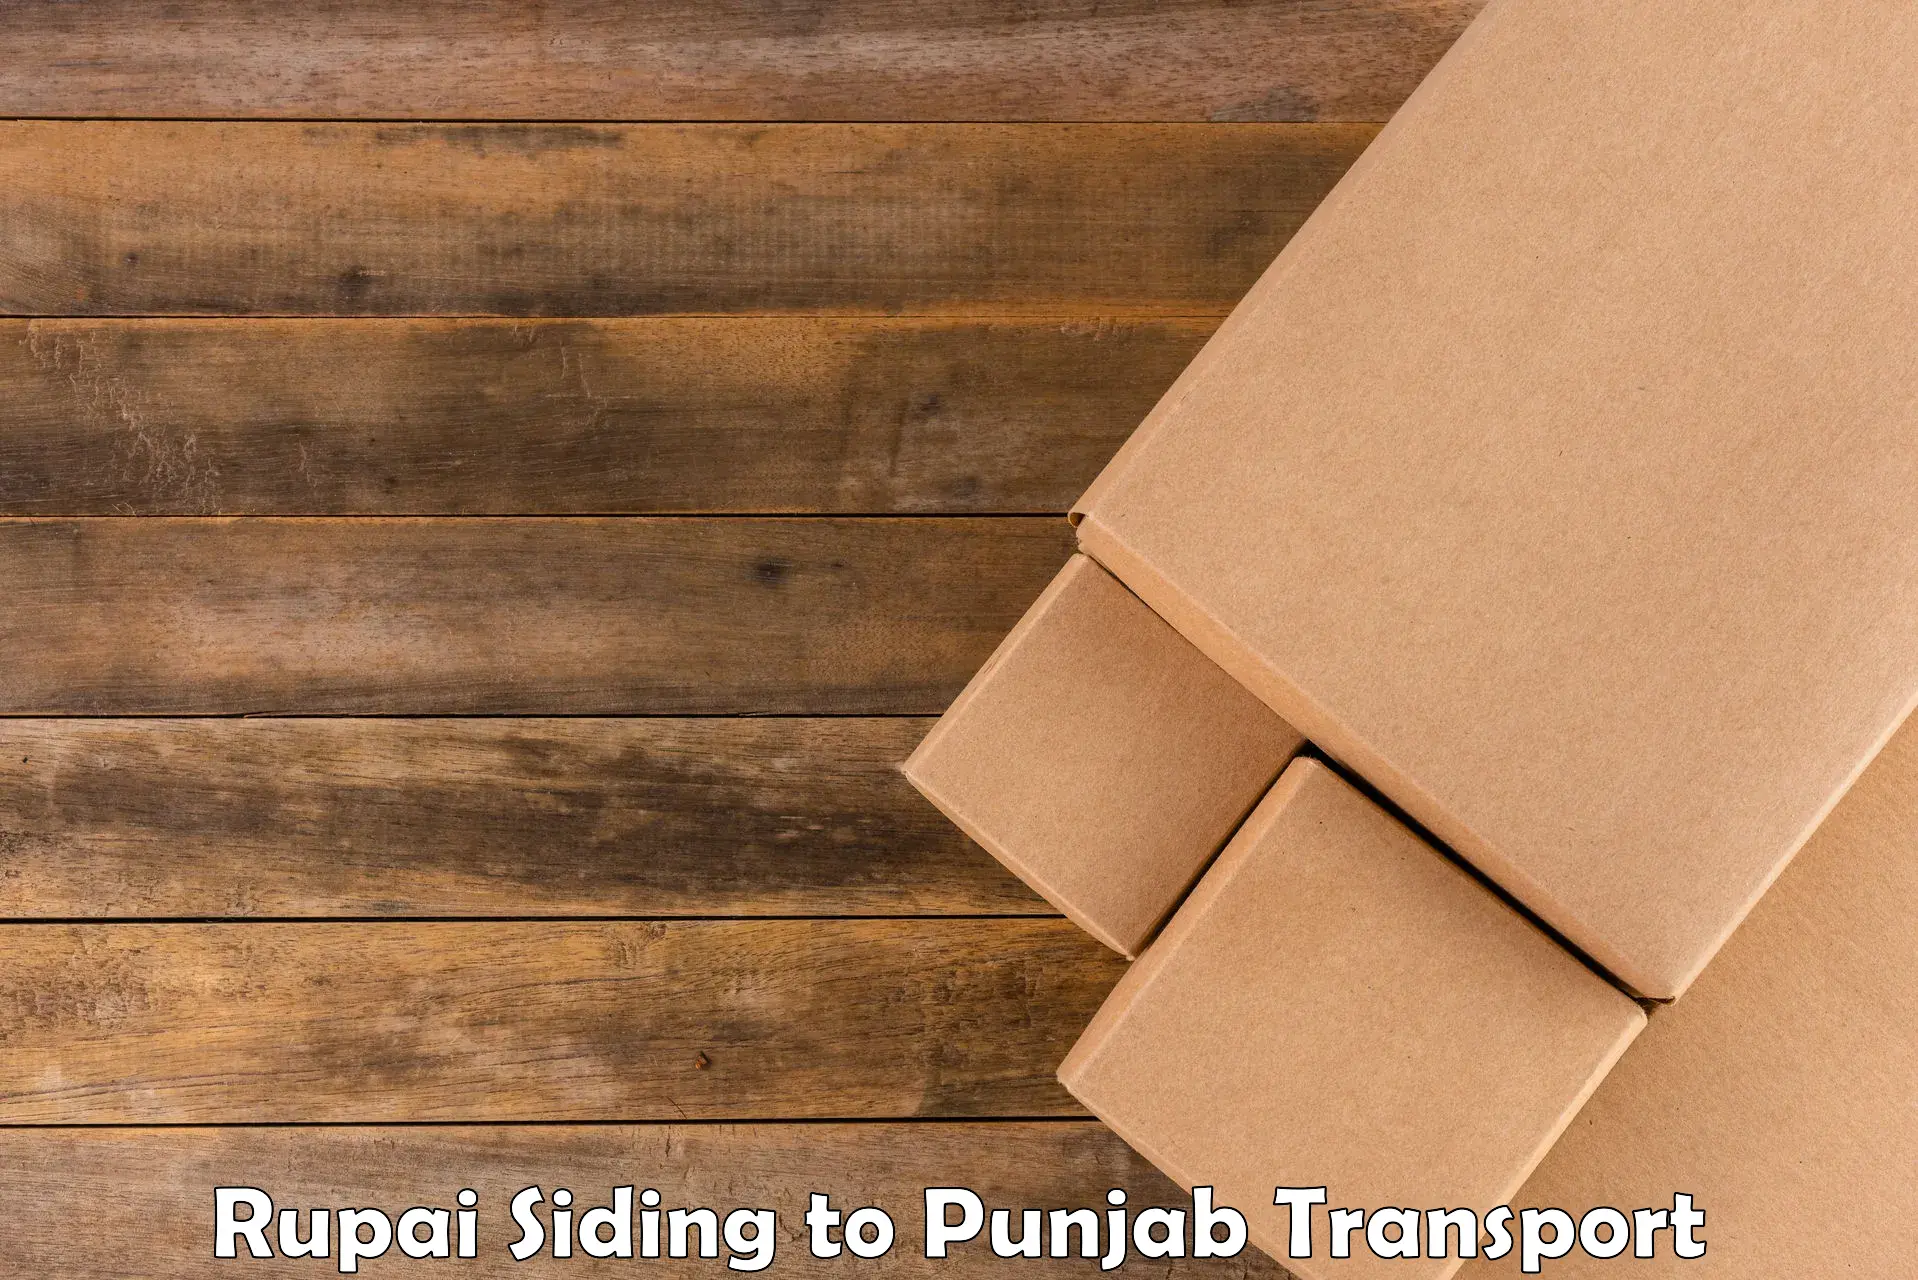 Nationwide transport services Rupai Siding to Dhuri